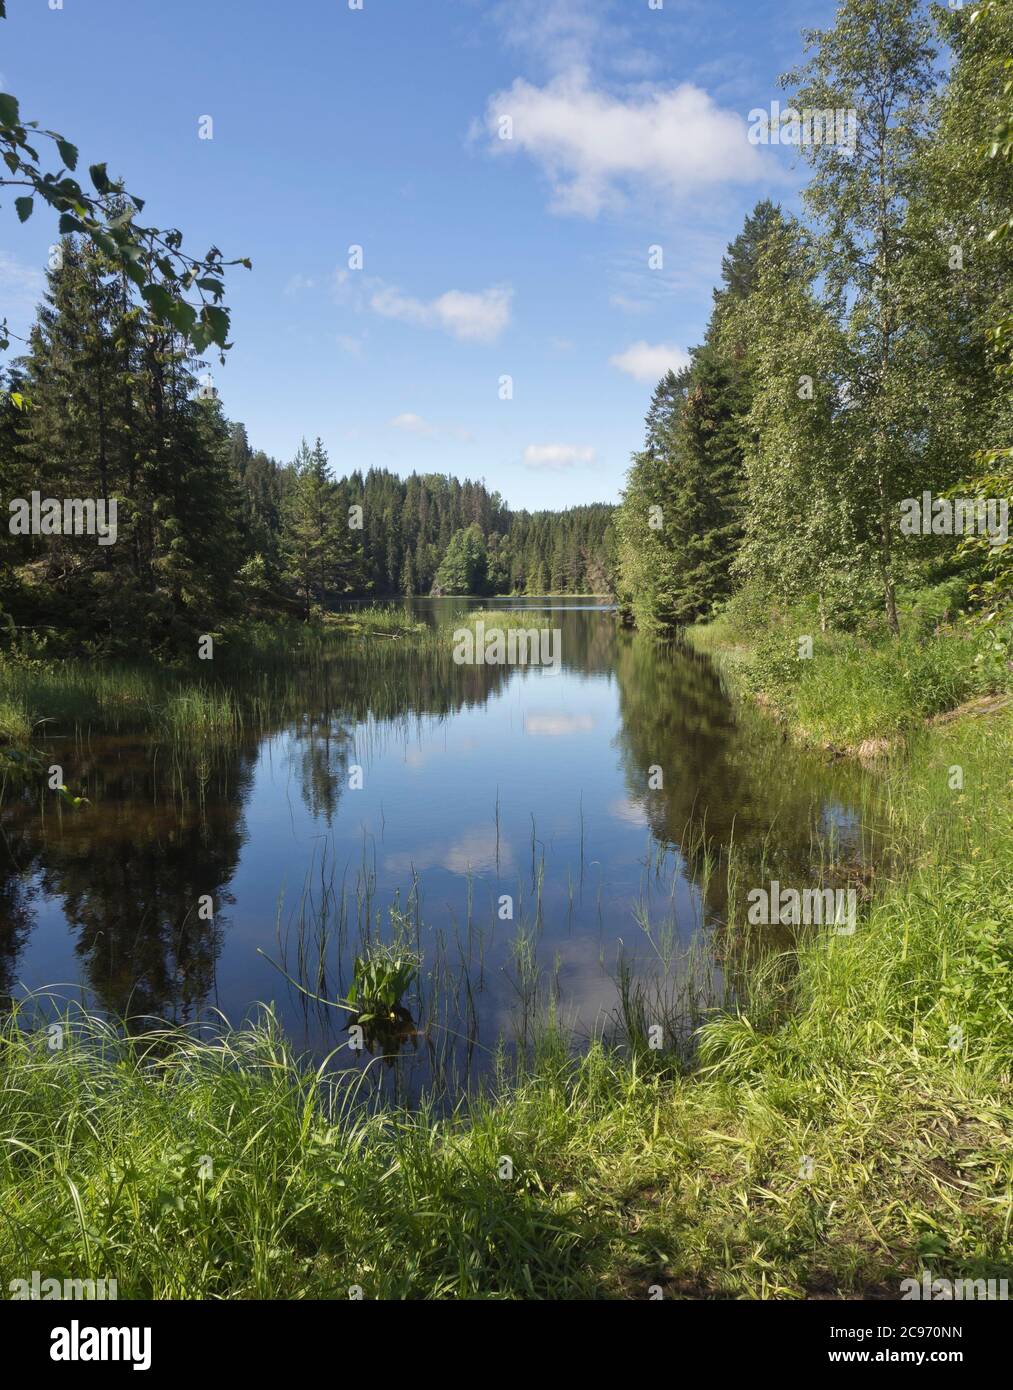 Beautiful summer landscape with lake and forest, in Ostmarka on the outskirts of the Norwegian capital Oslo Stock Photo